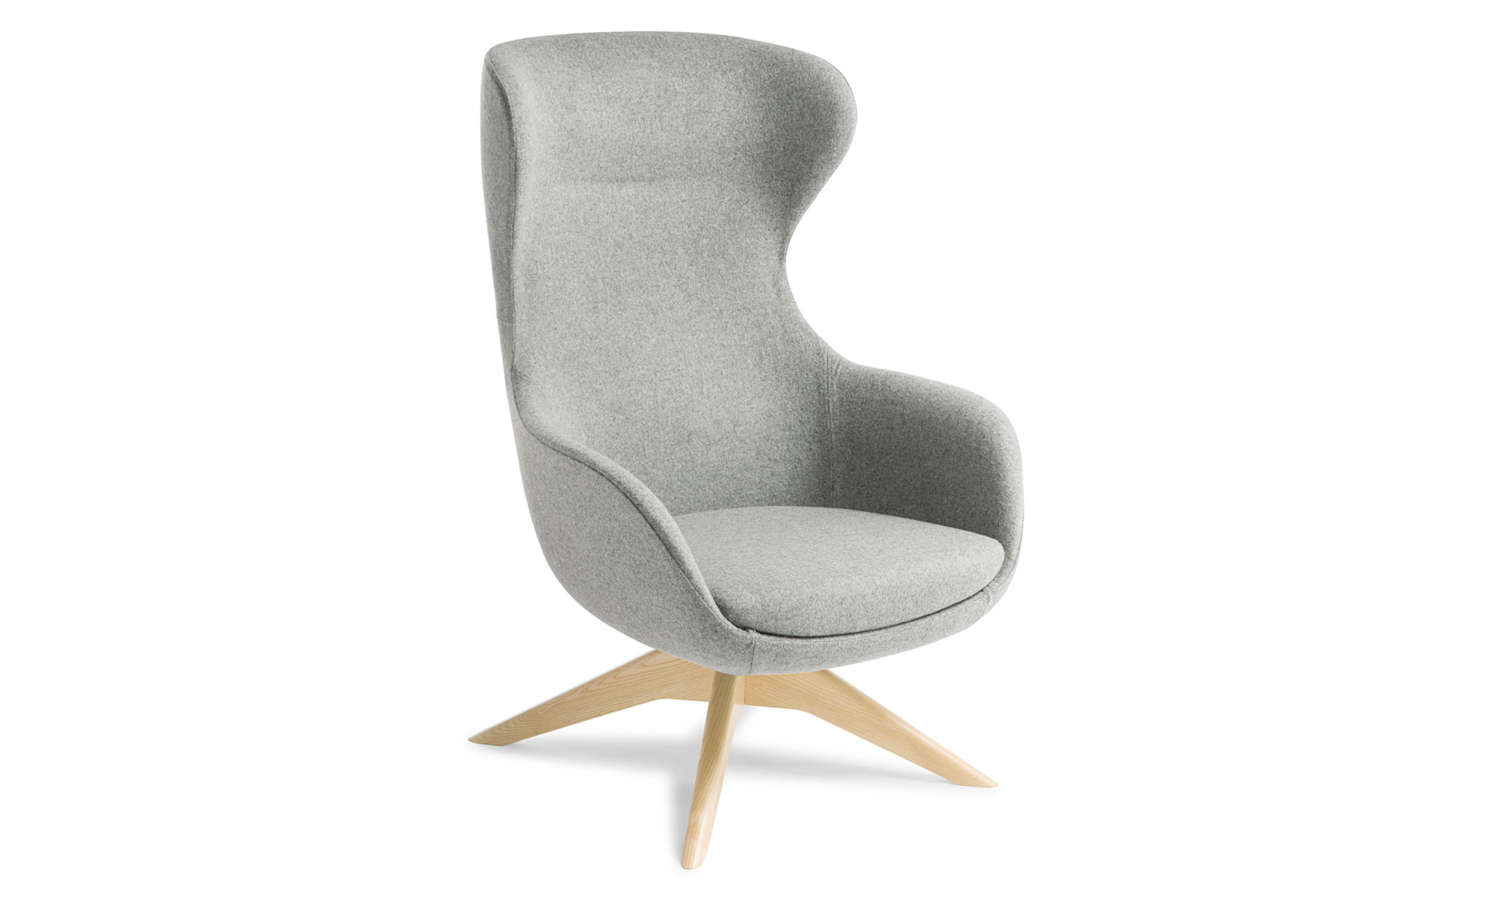 Crestline Elizabeth Chair with Timber Swivel Base in Natural Beech